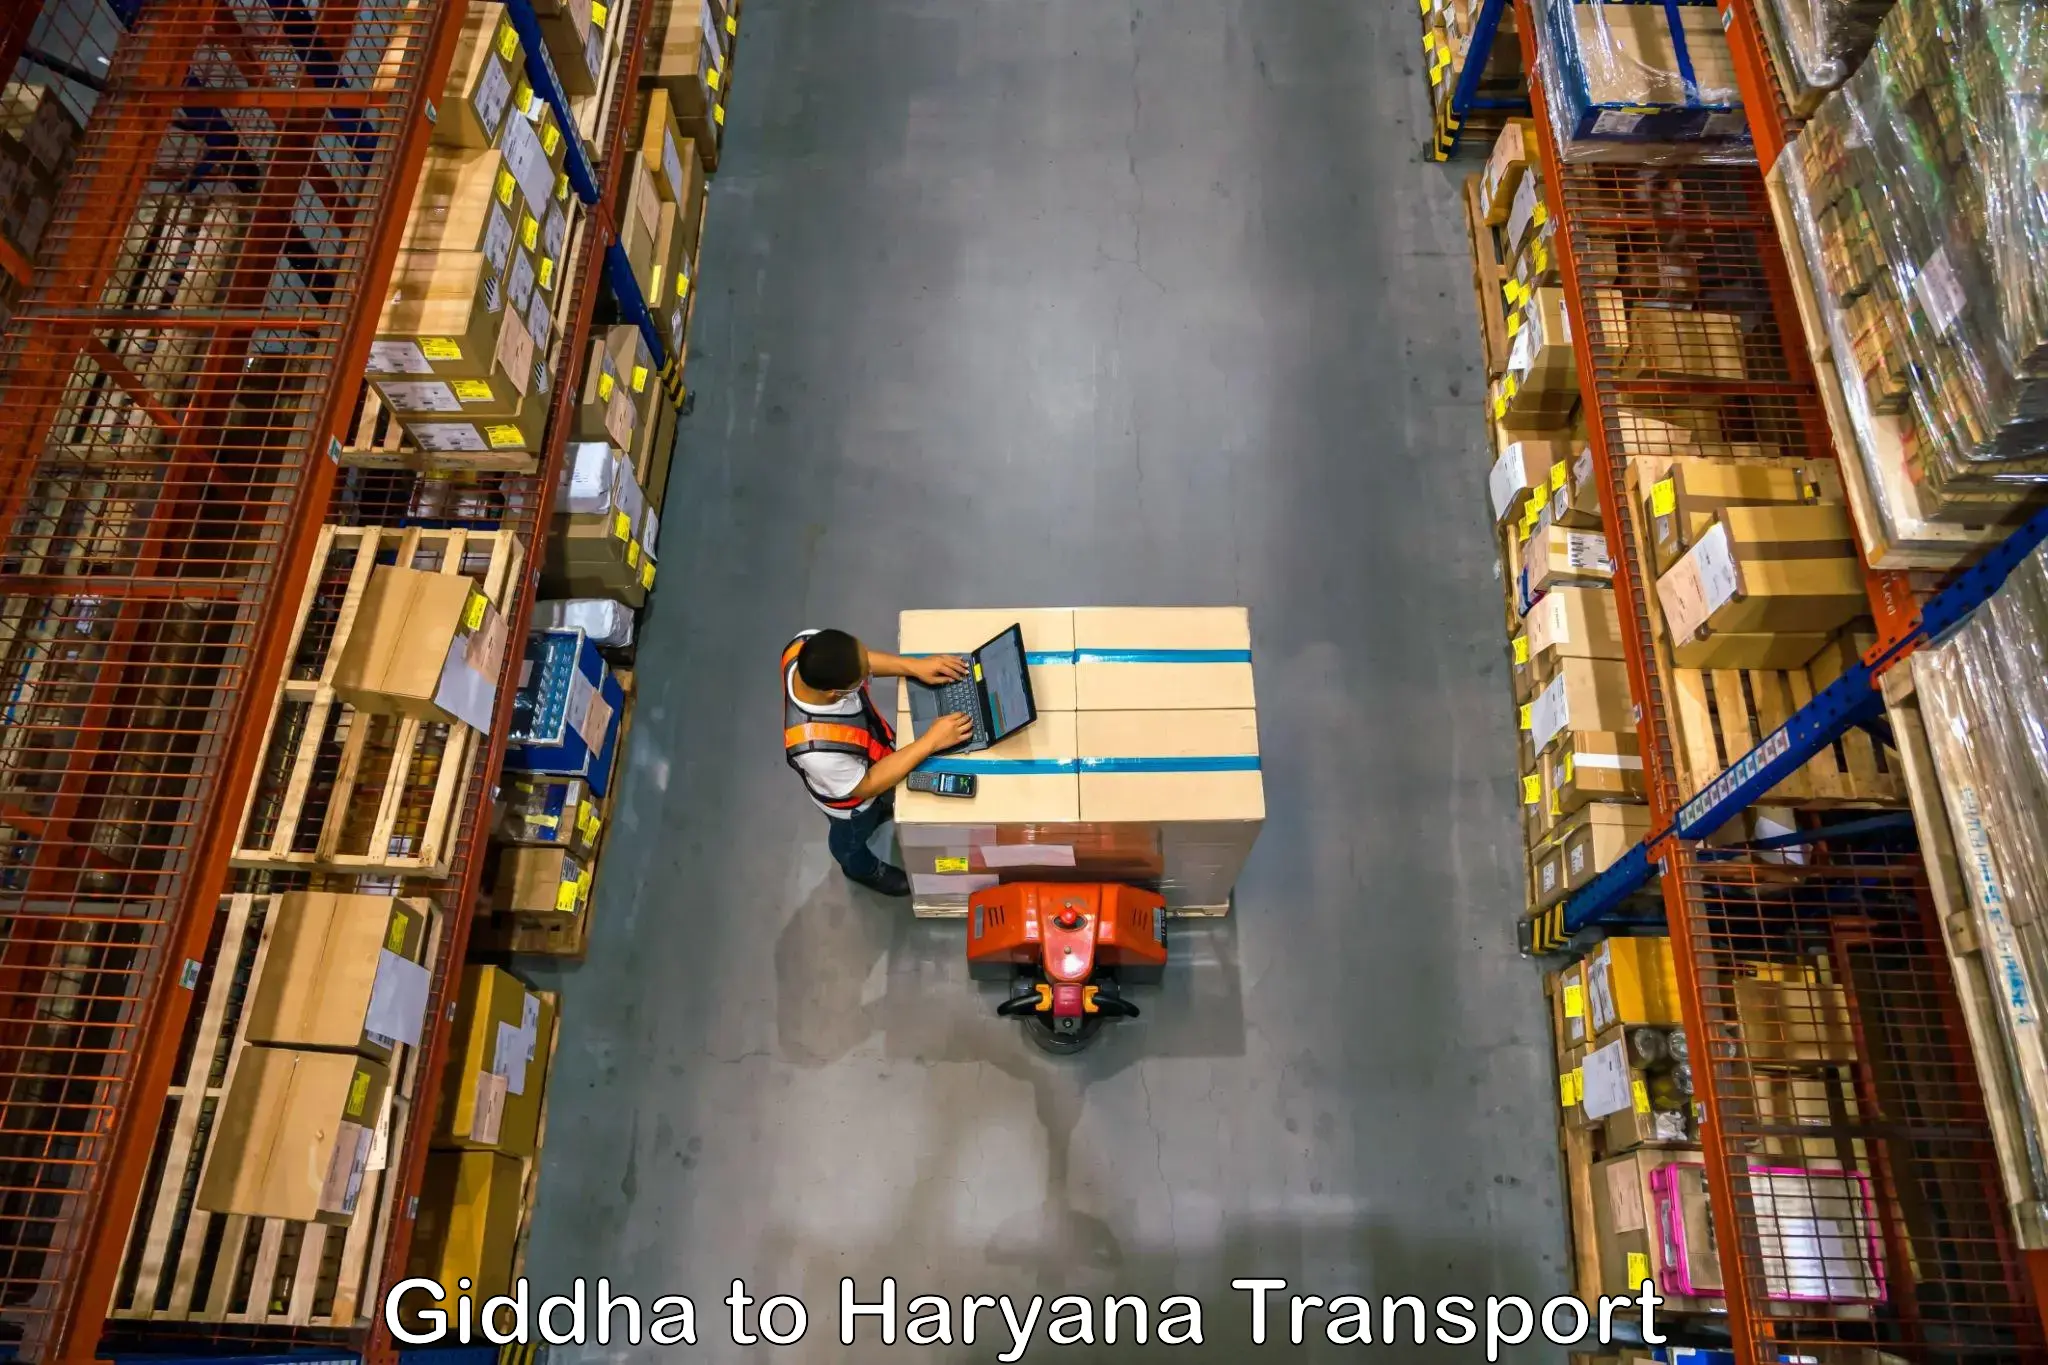 Part load transport service in India Giddha to Haryana